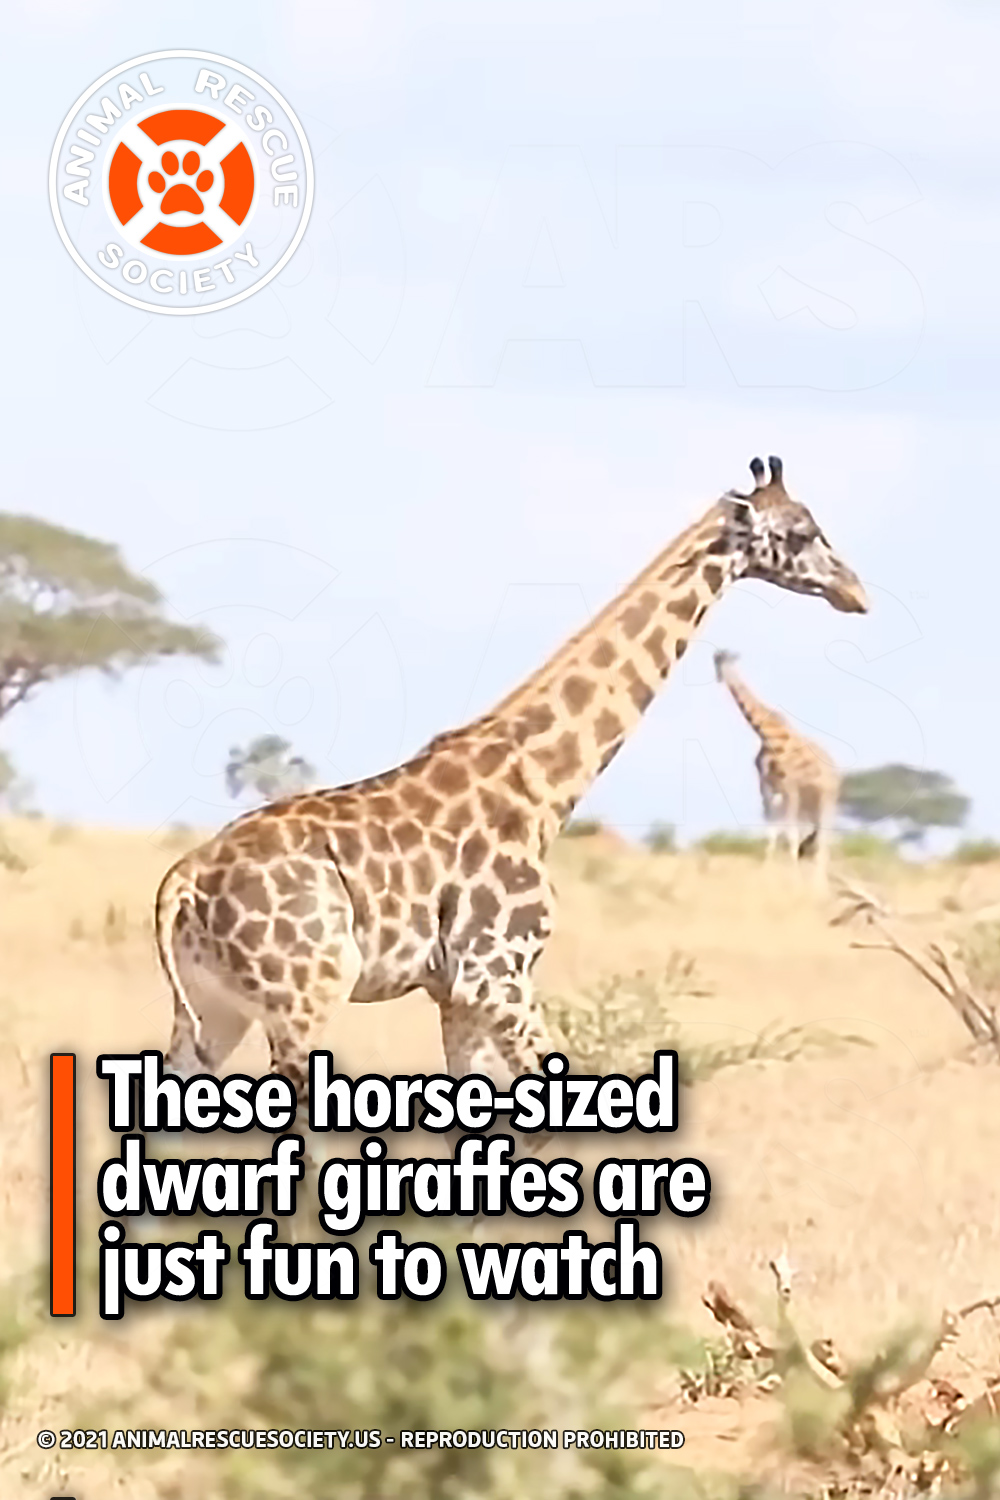 These horse-sized dwarf giraffes are just fun to watch